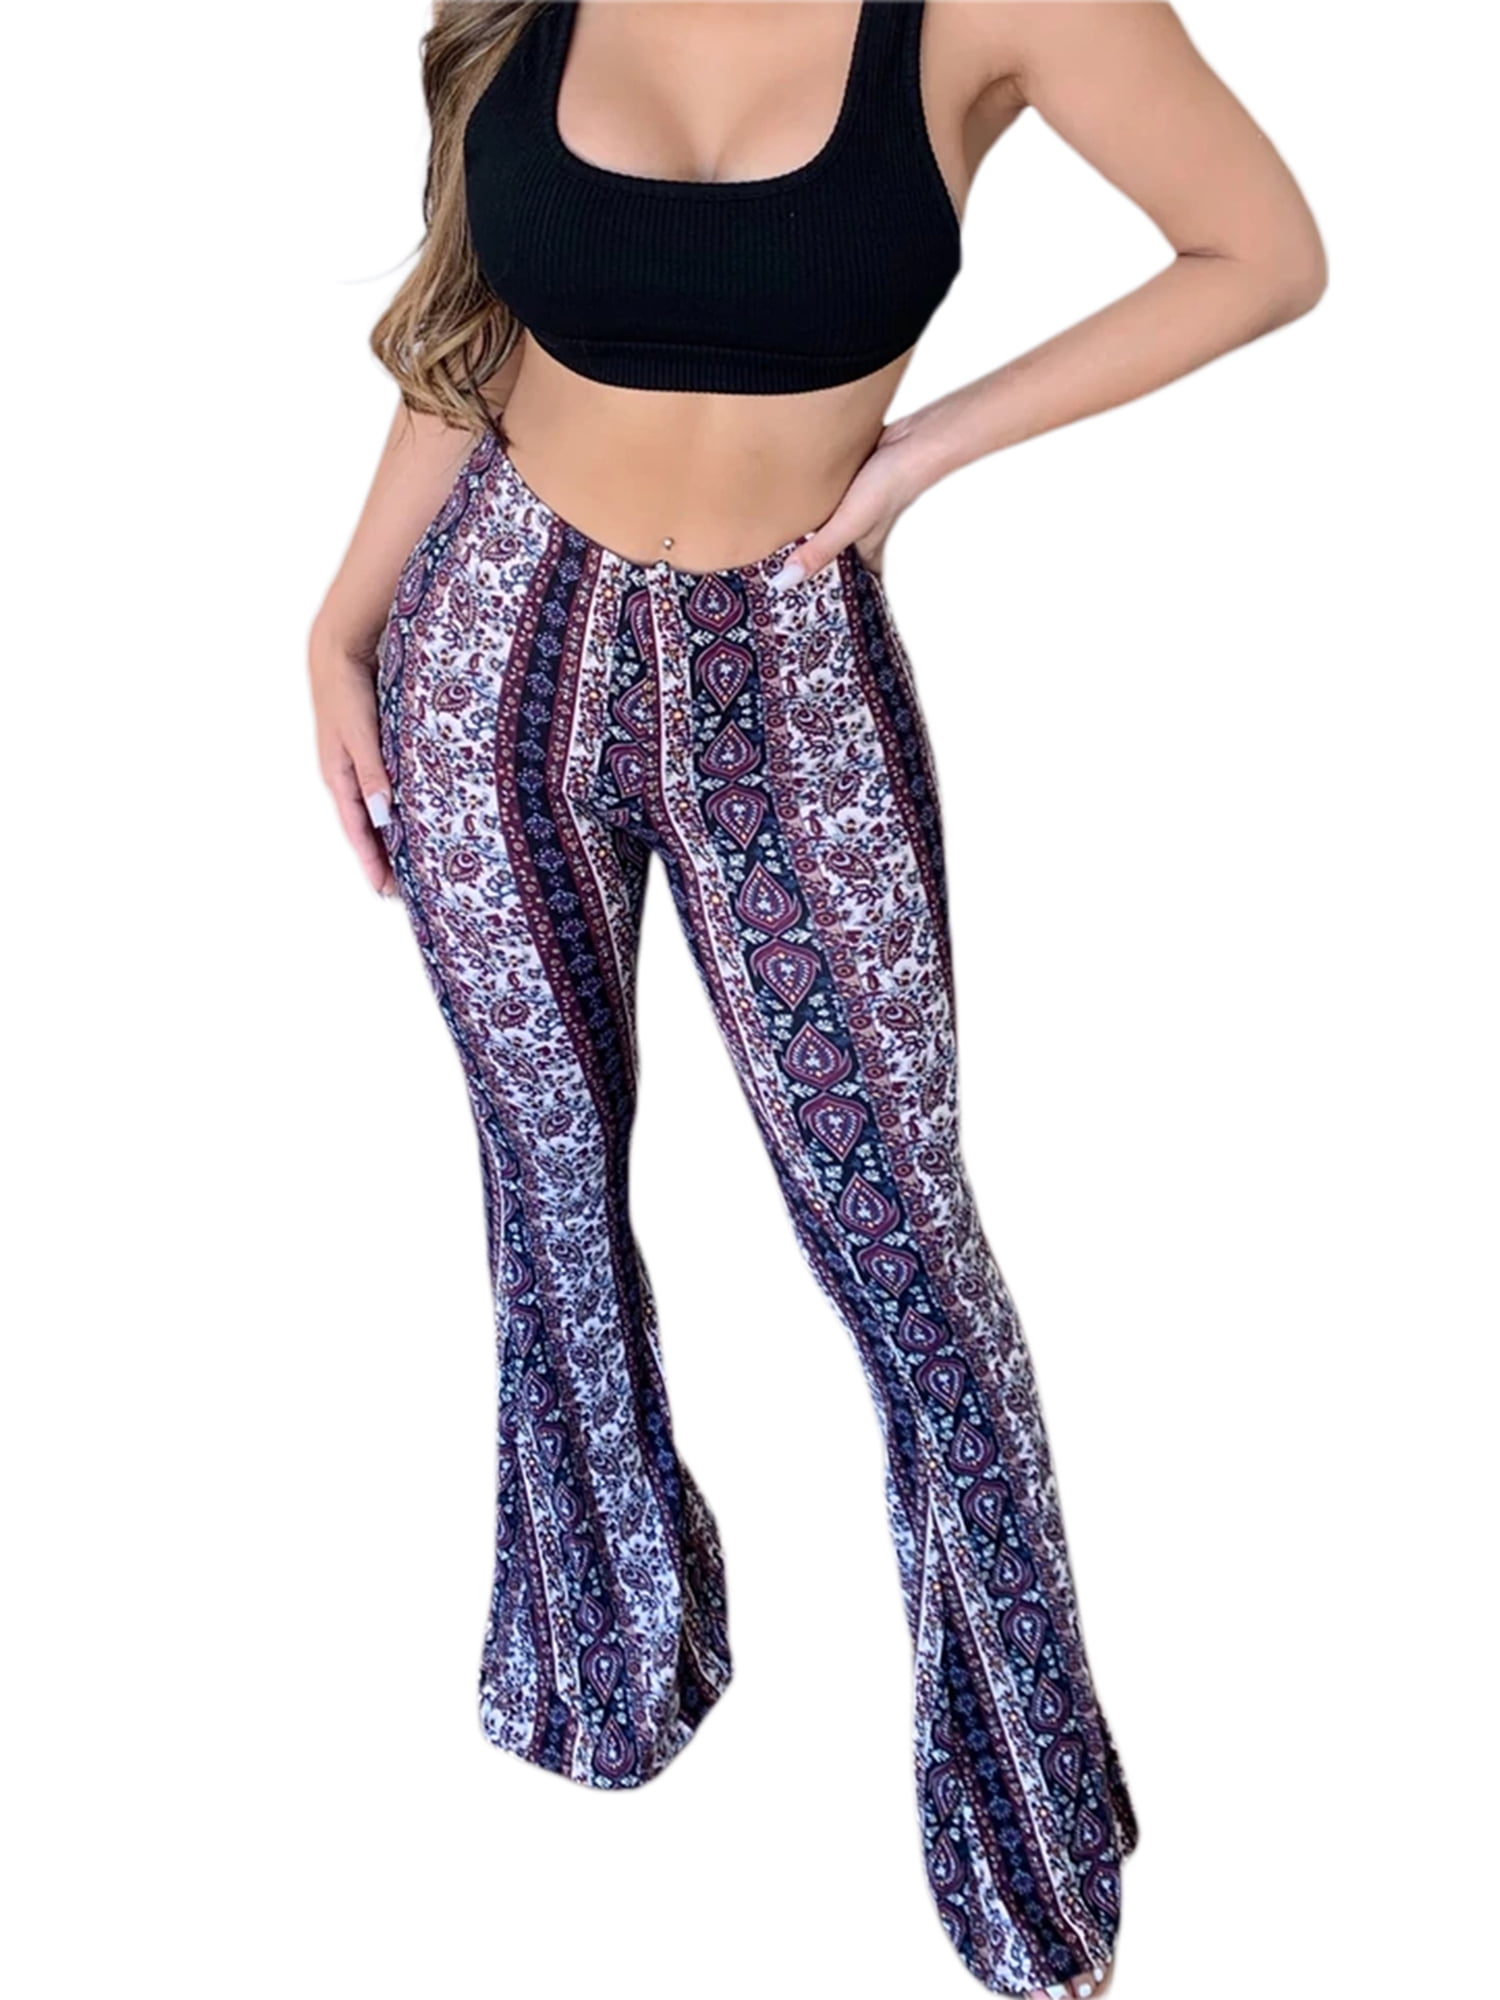 Pedal Pusher Pants-womens Clothing Cotton Womens Pants Athletic Hippie  Clothes Yoga Pants Bohemian Style Fashion Athleisure Pants -  Canada